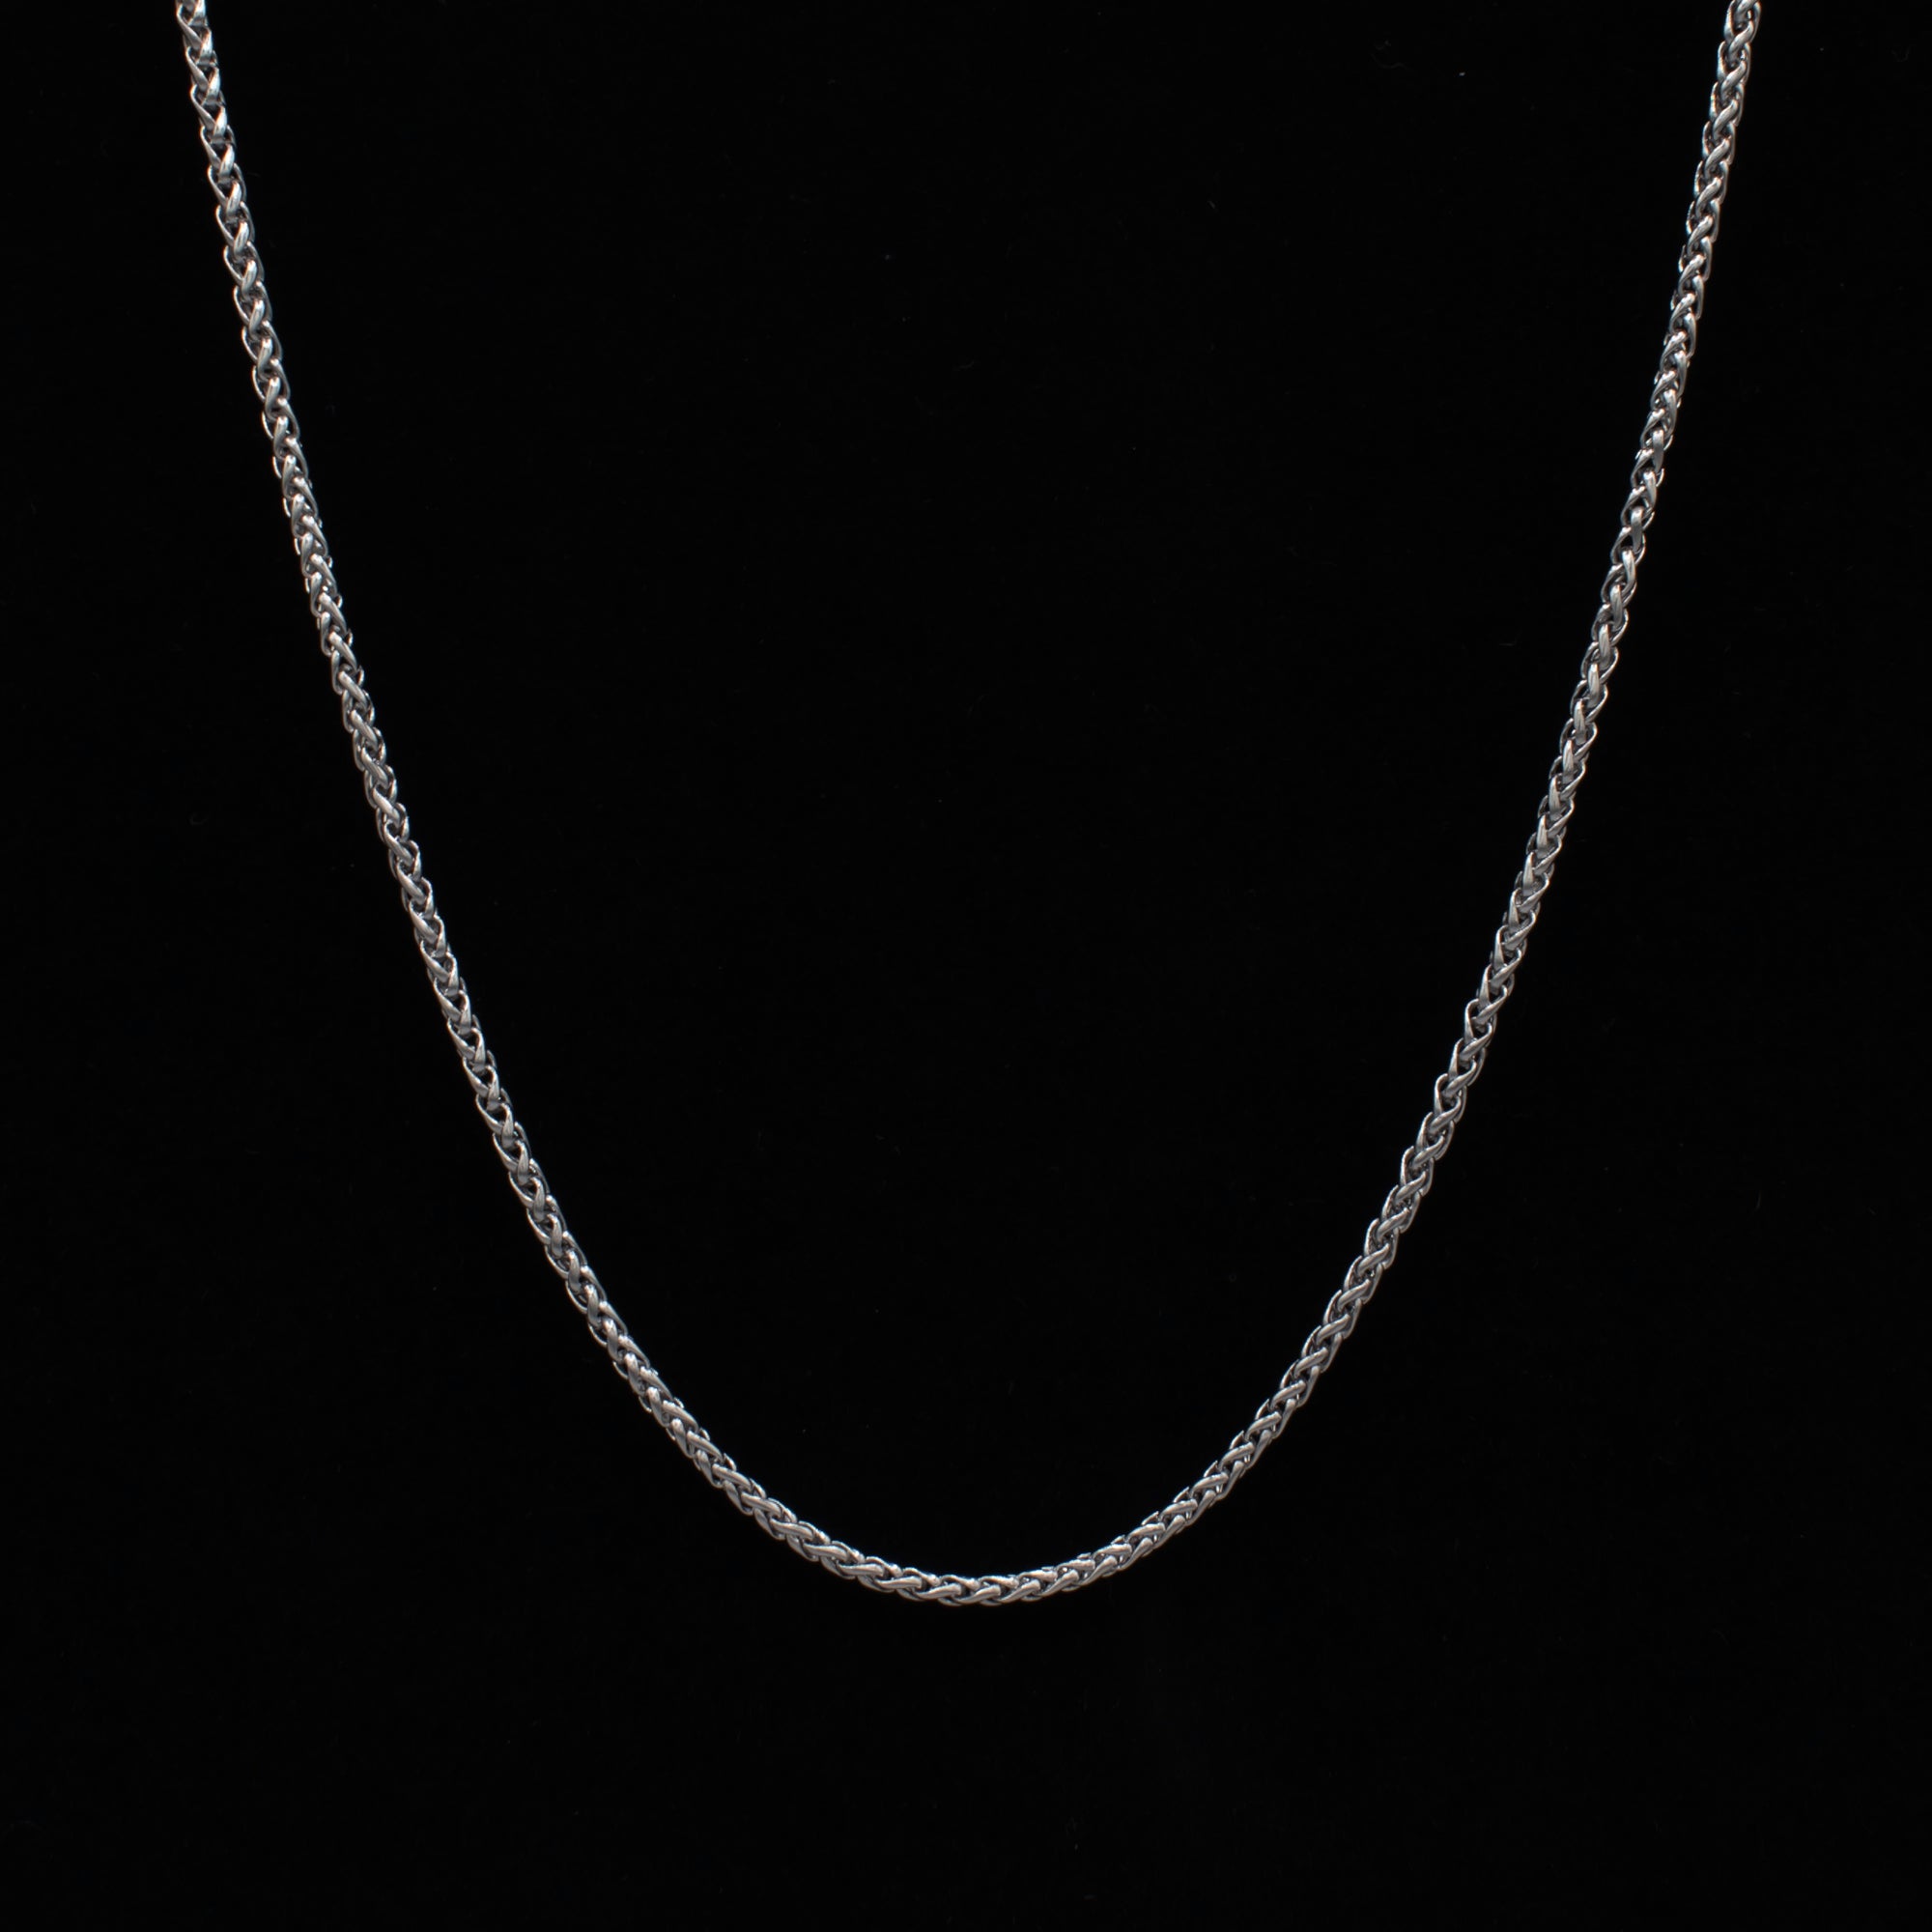 Silver Foxtail Necklace - 2mm